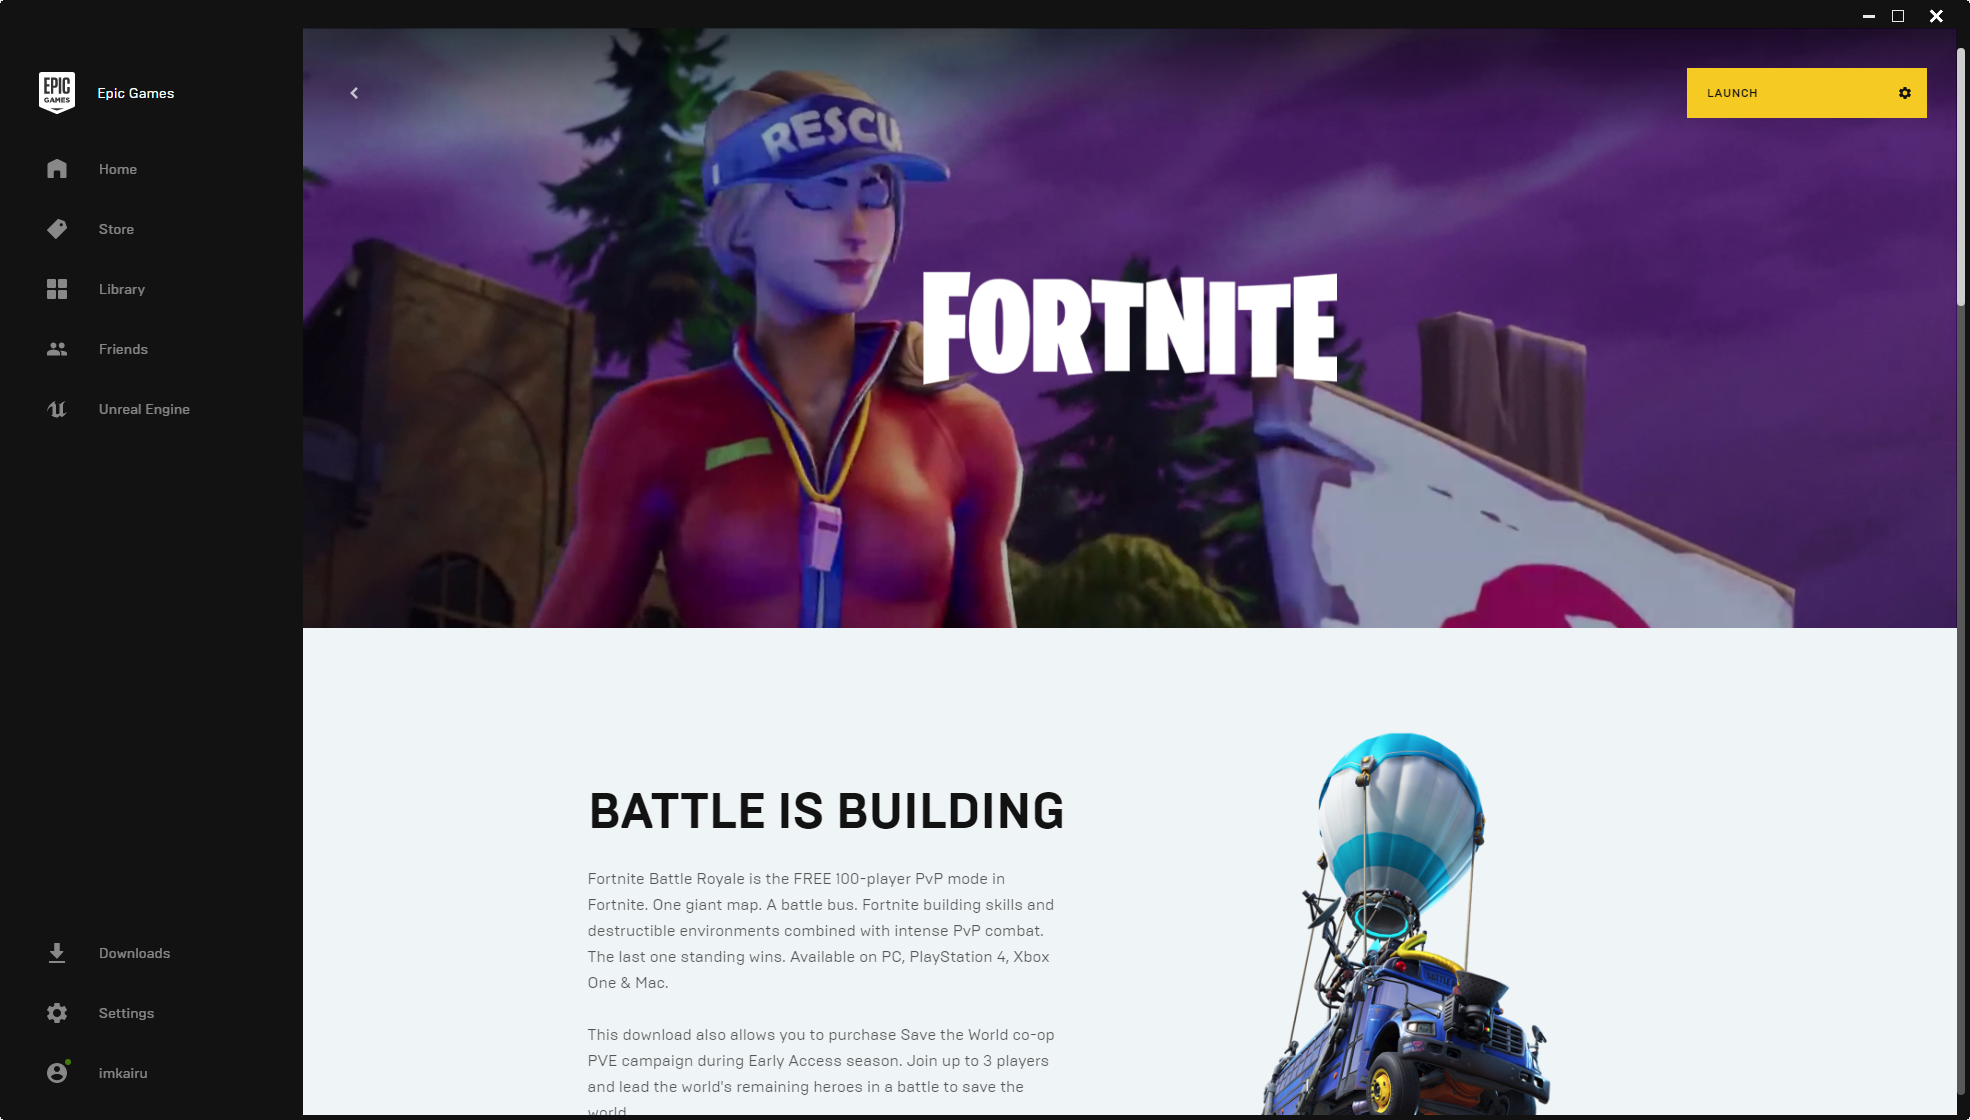 Epic Games Launcher Gets A Facelift In A New Beta - Here's How To Get It